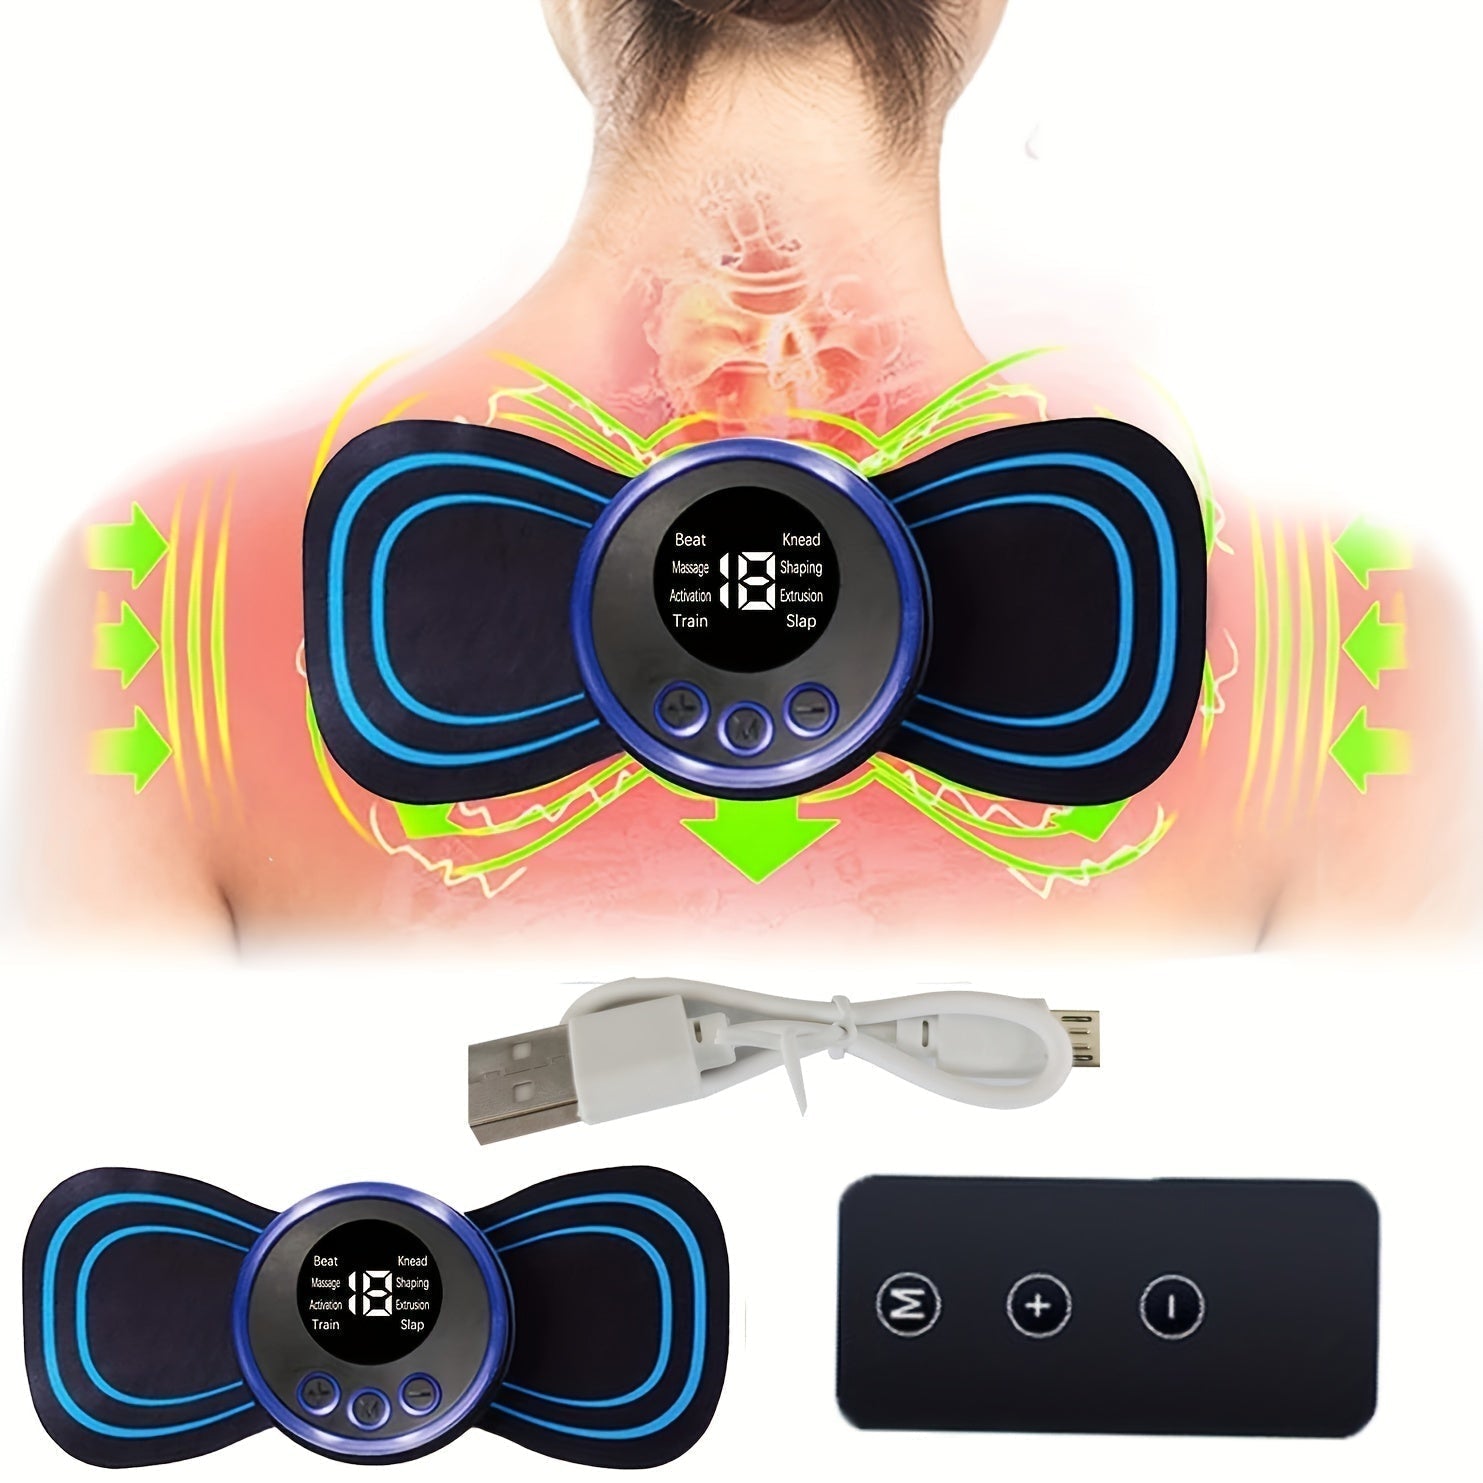 Relieve Pain & Increase Blood Flow With This Portable Mini Massager - 8 Modes For Whole Body Neck Back Waist Arms Legs Aches